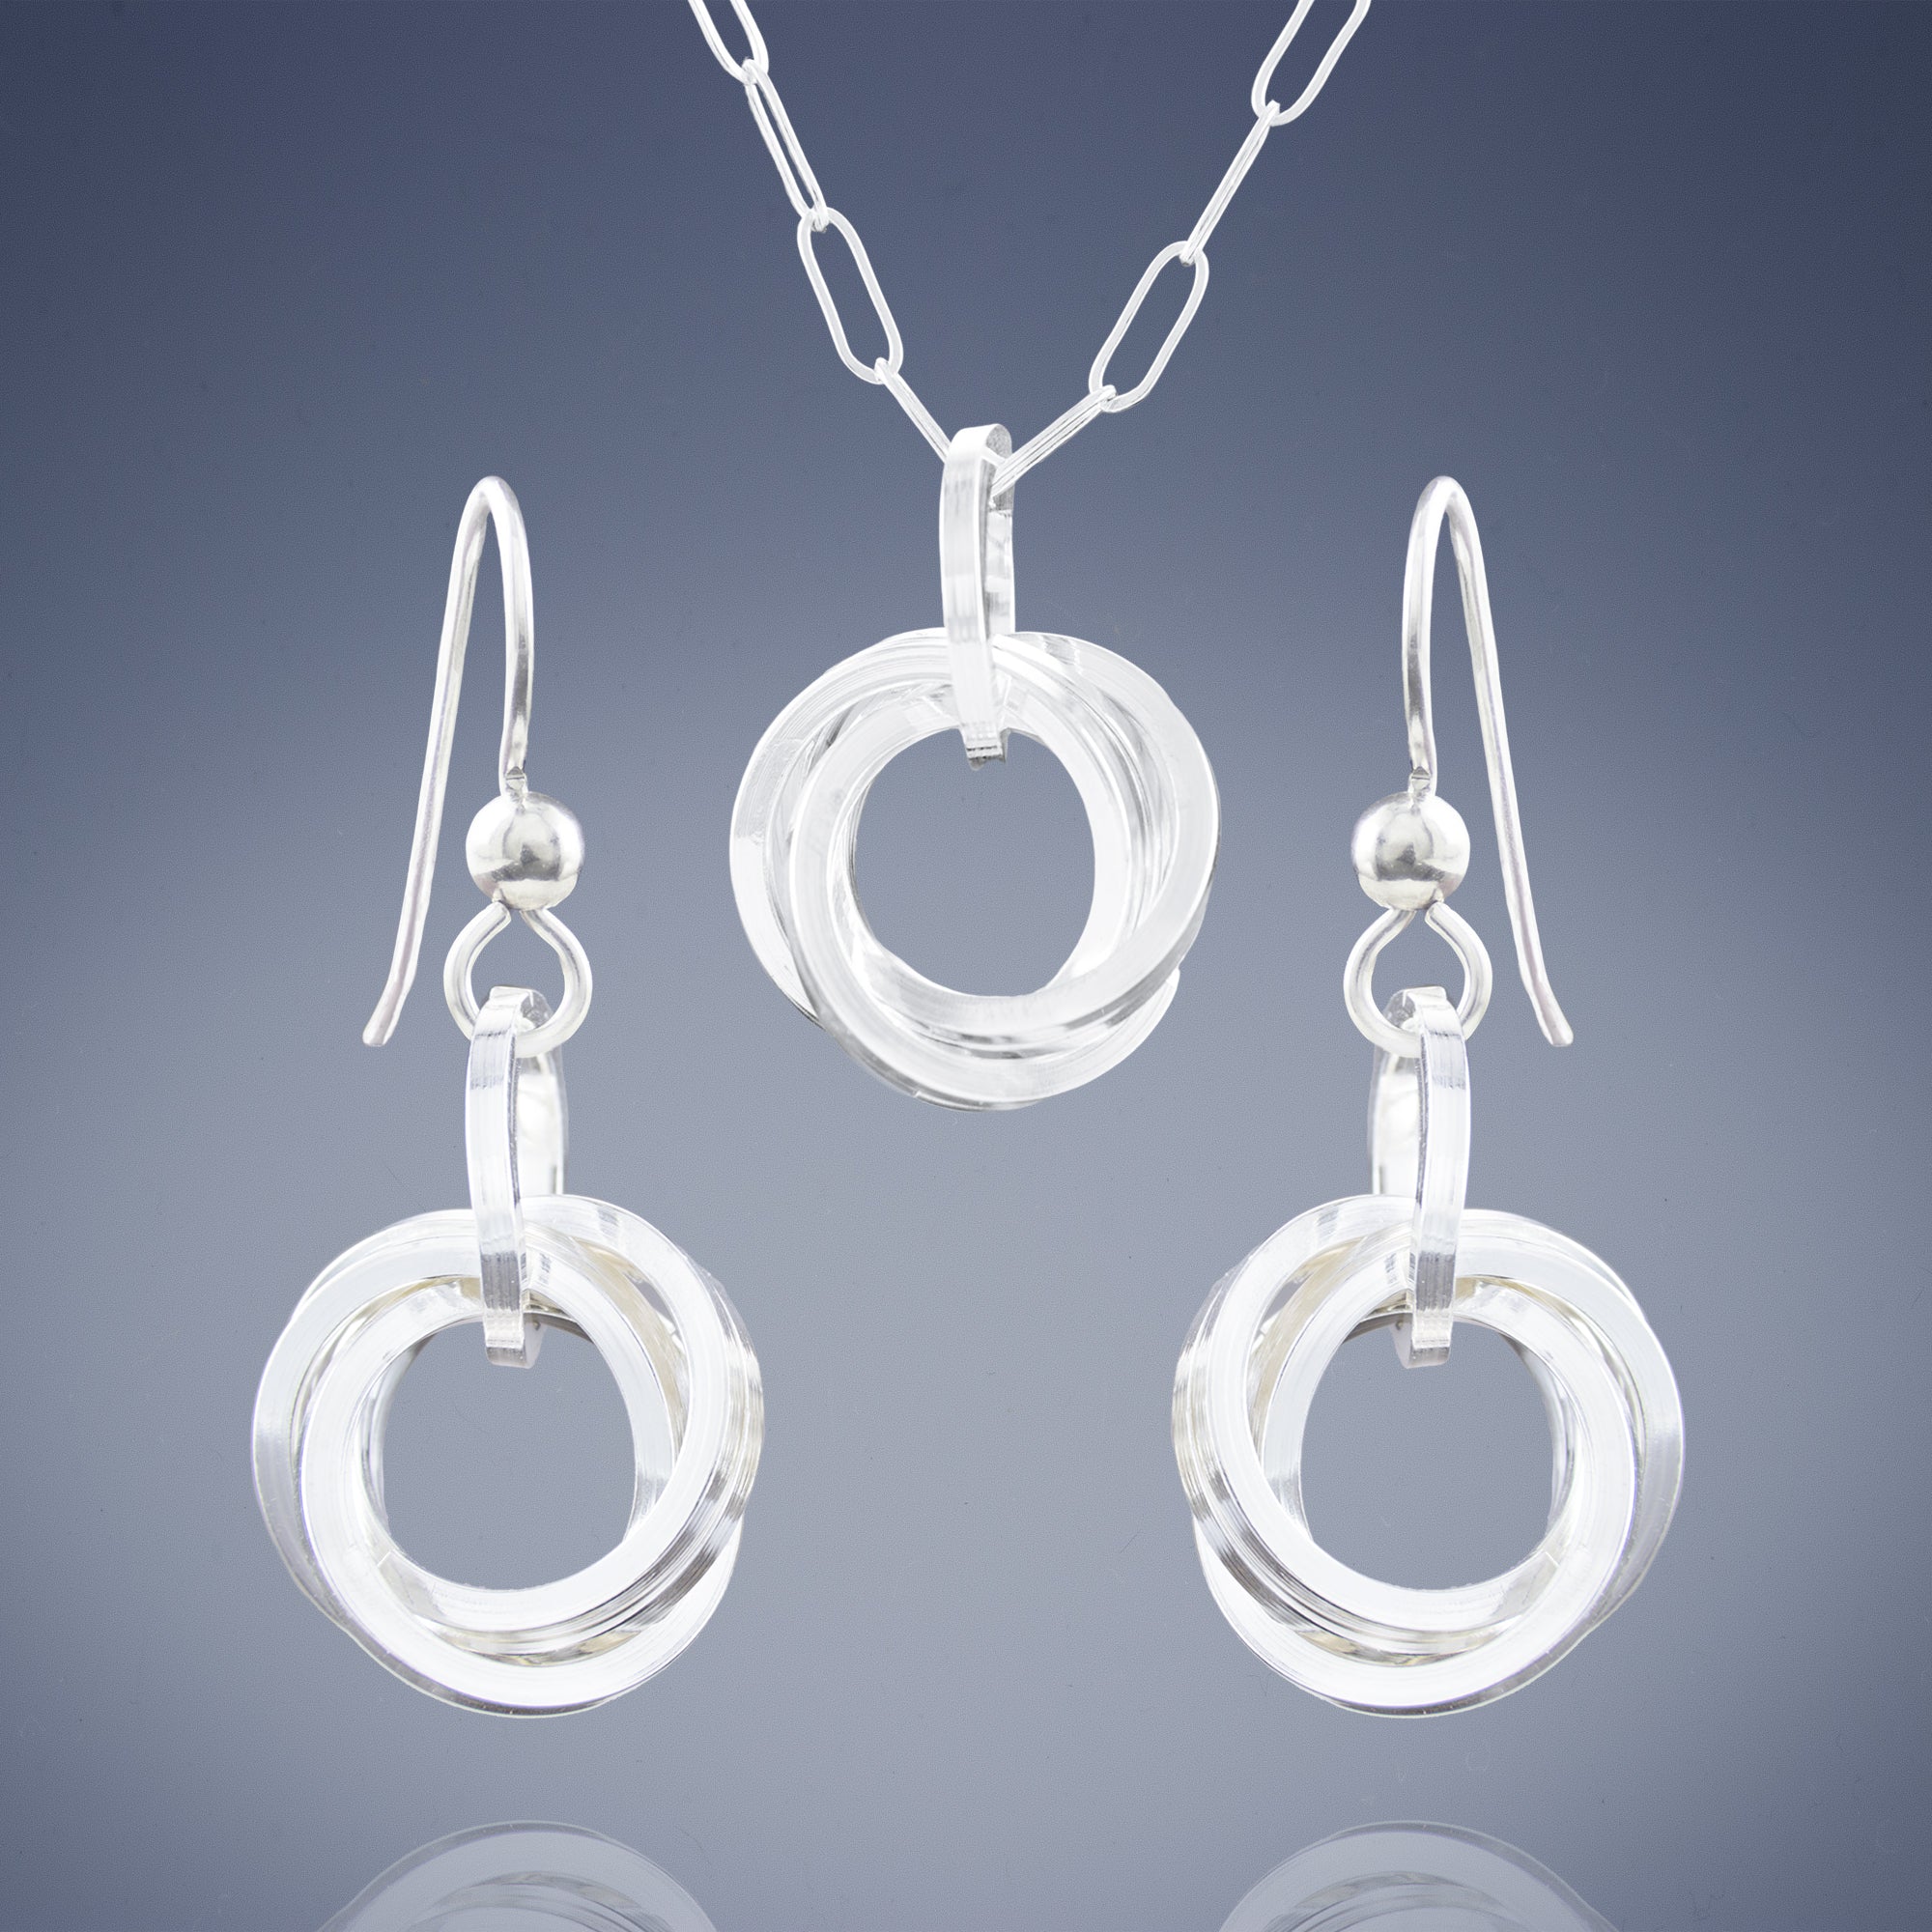 Classic Love Knot Jewelry Gift Set with Earrings and Pendant Necklace in Argentium Sterling Silver